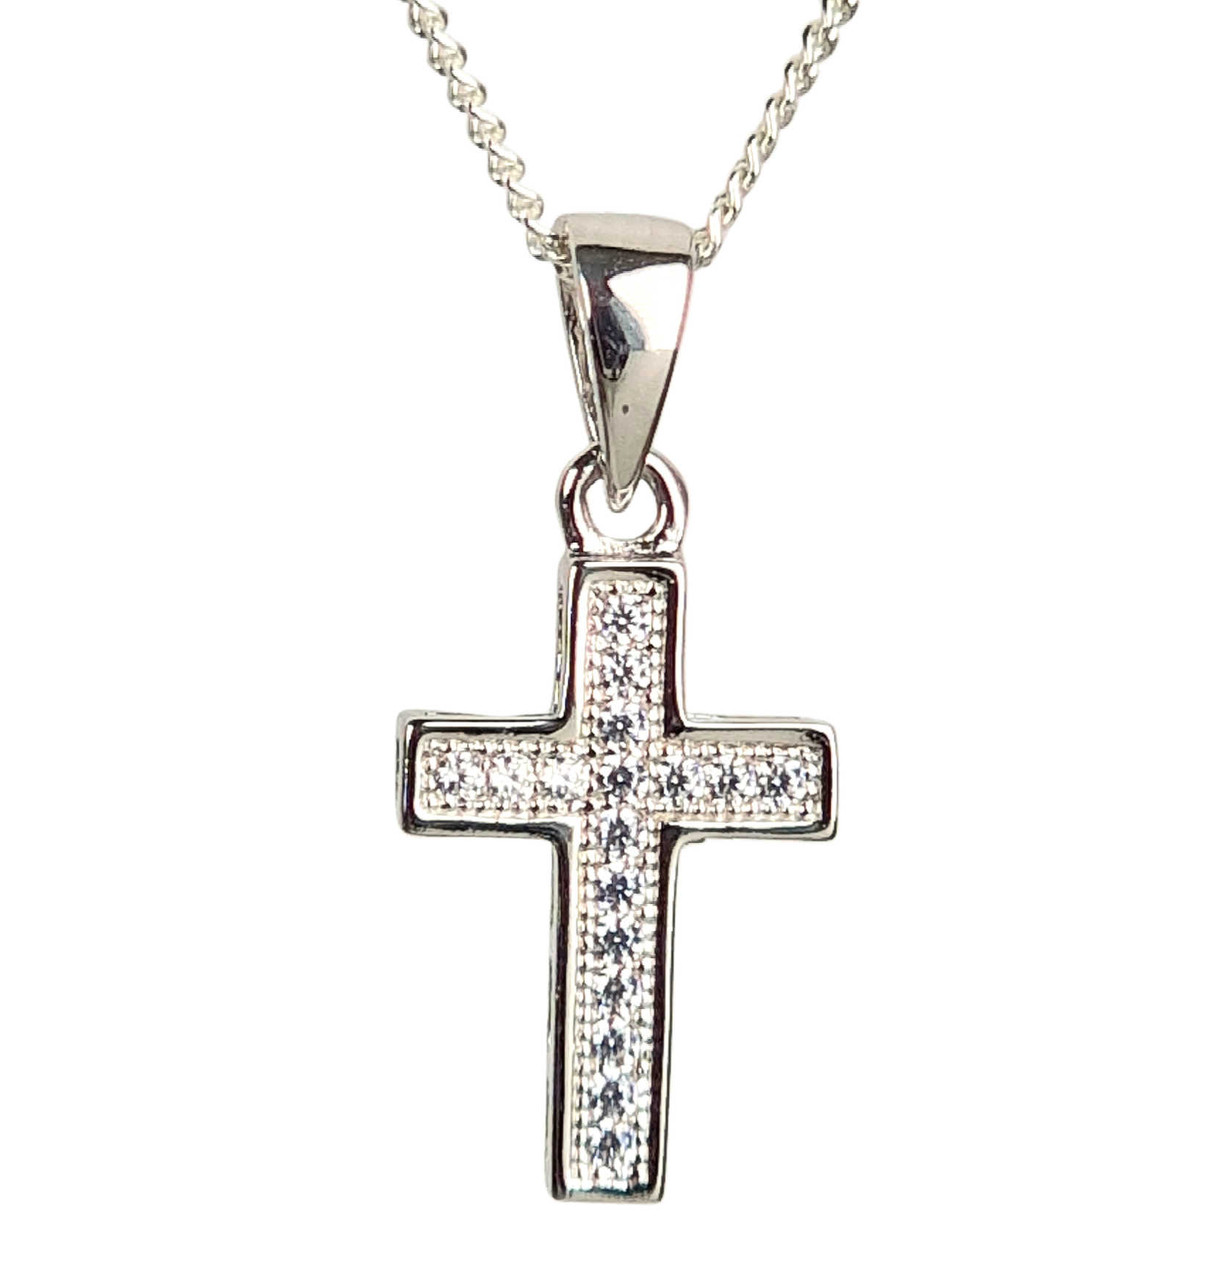 Stainless Steel Holy Cross Pendant with Chain